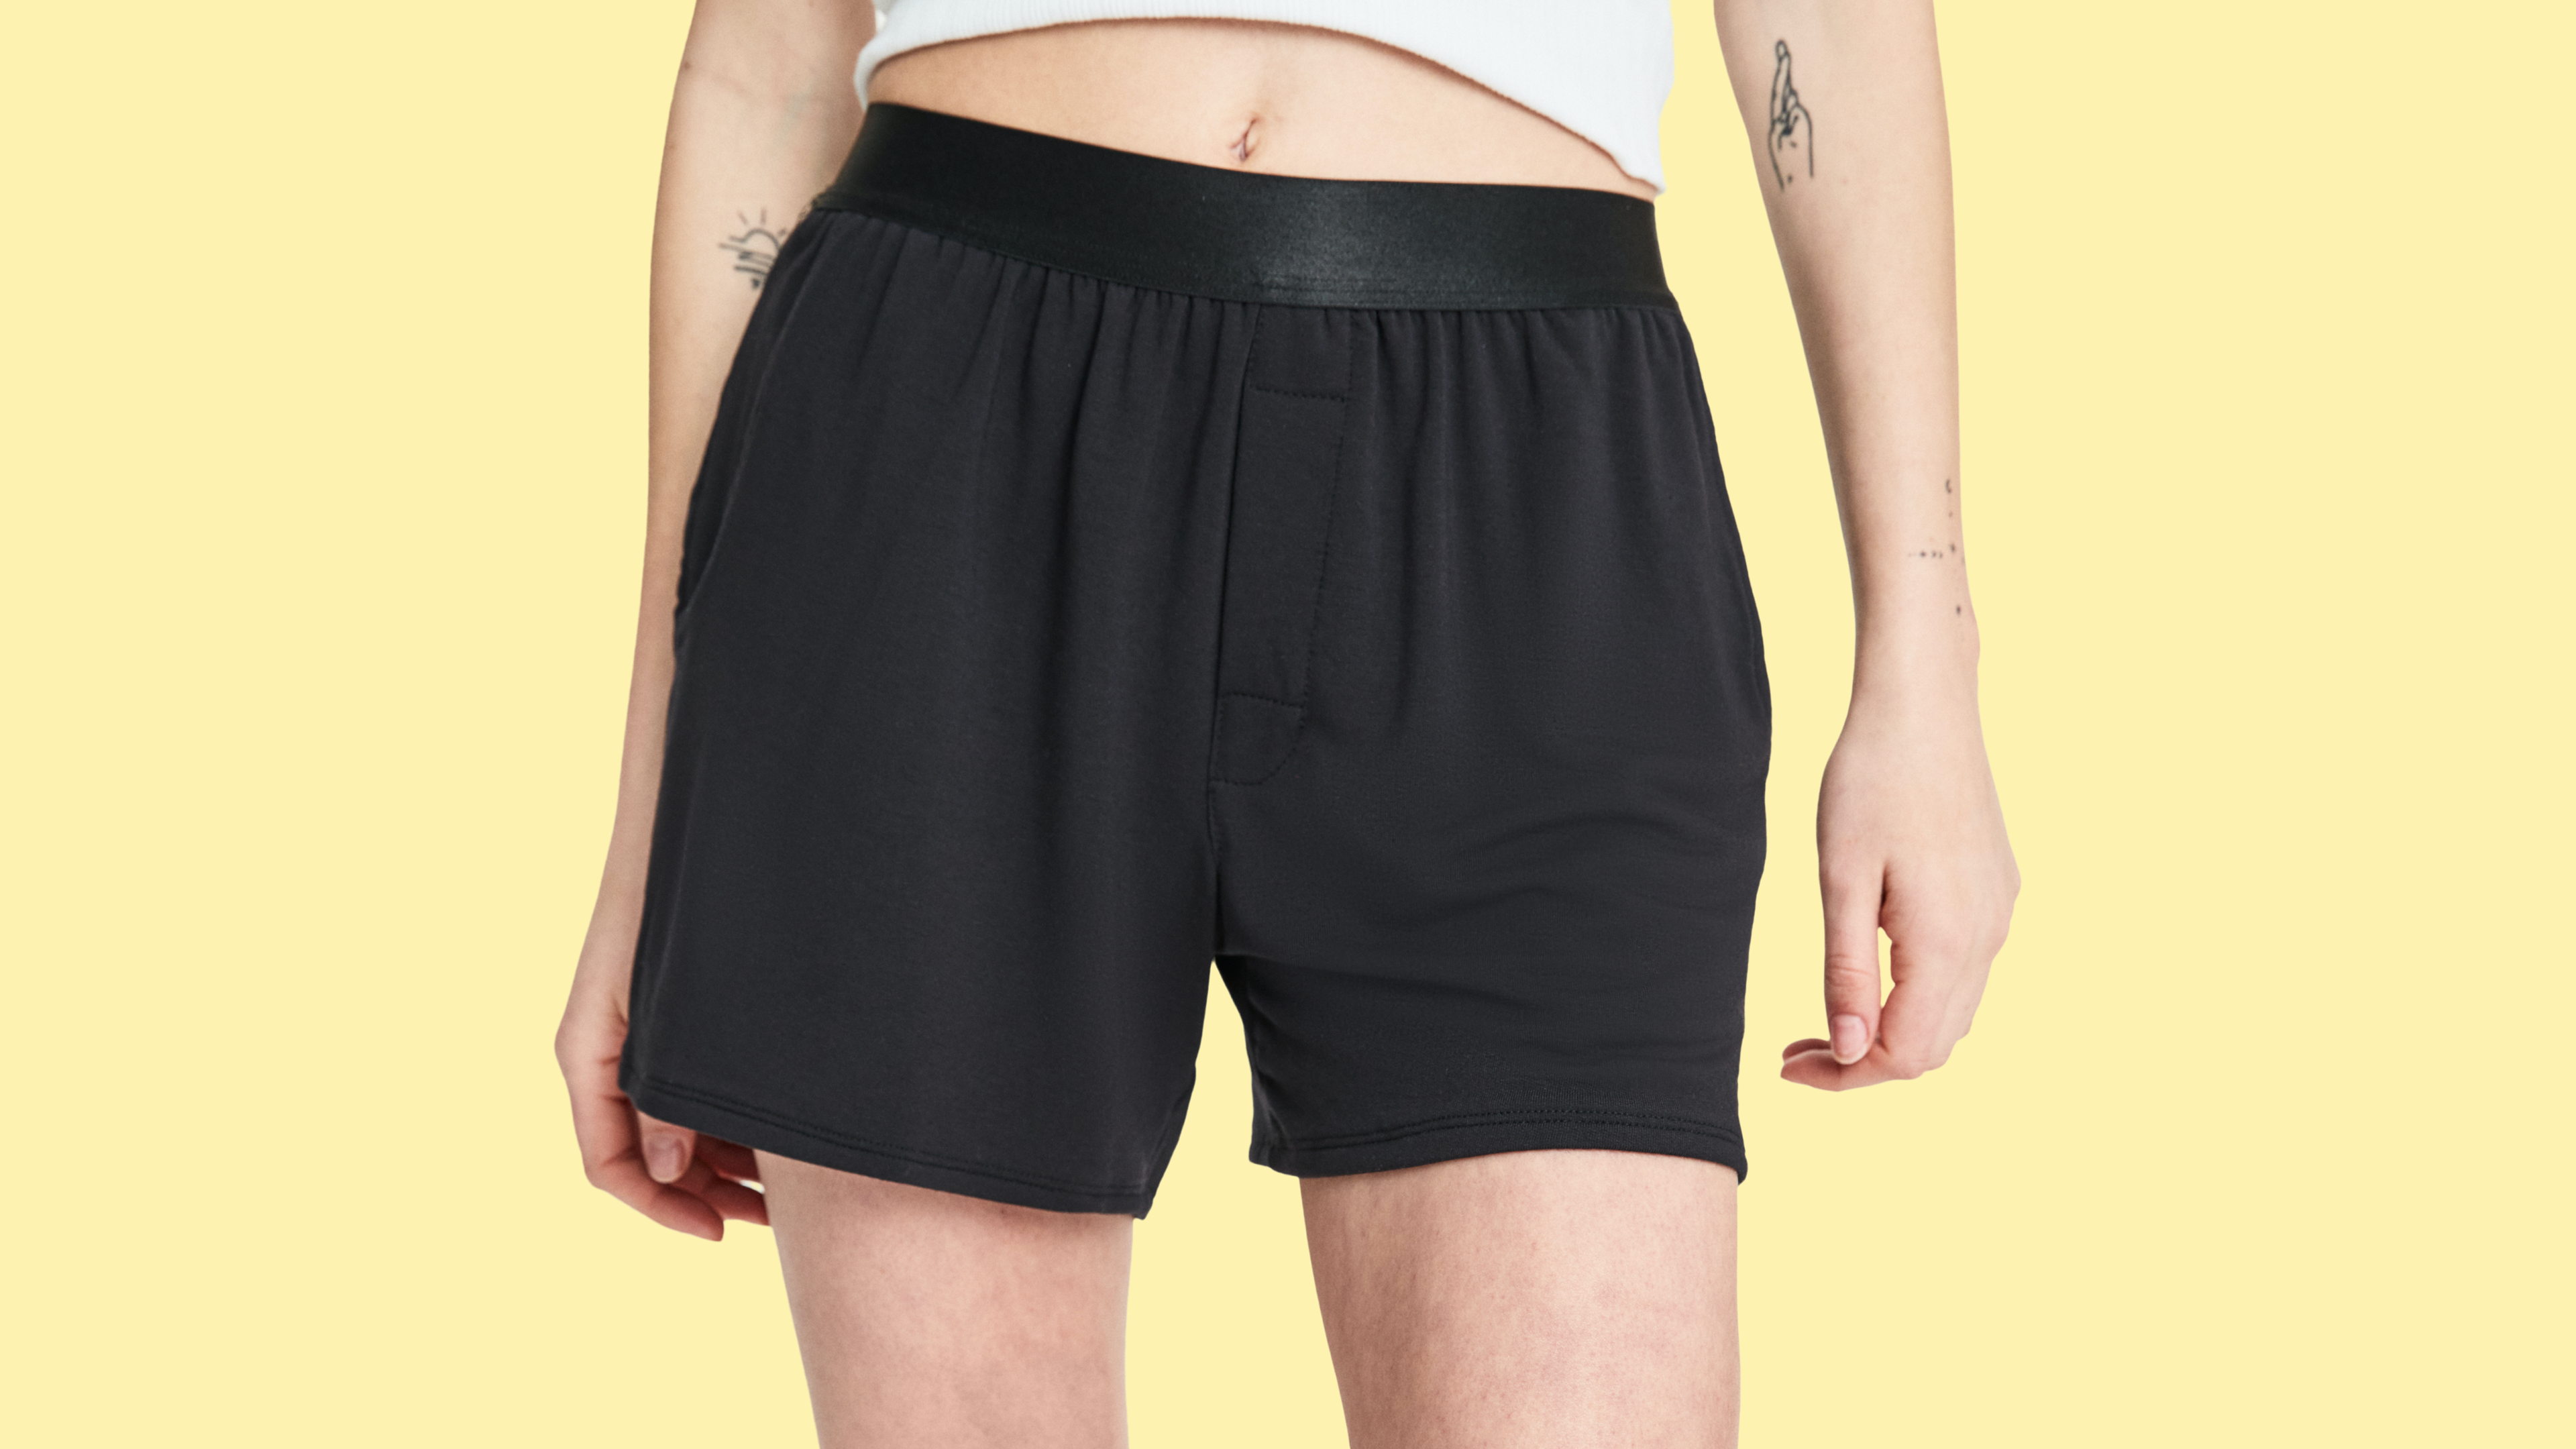 boxer shorts that are comfy to sleep and lounge in with pockets